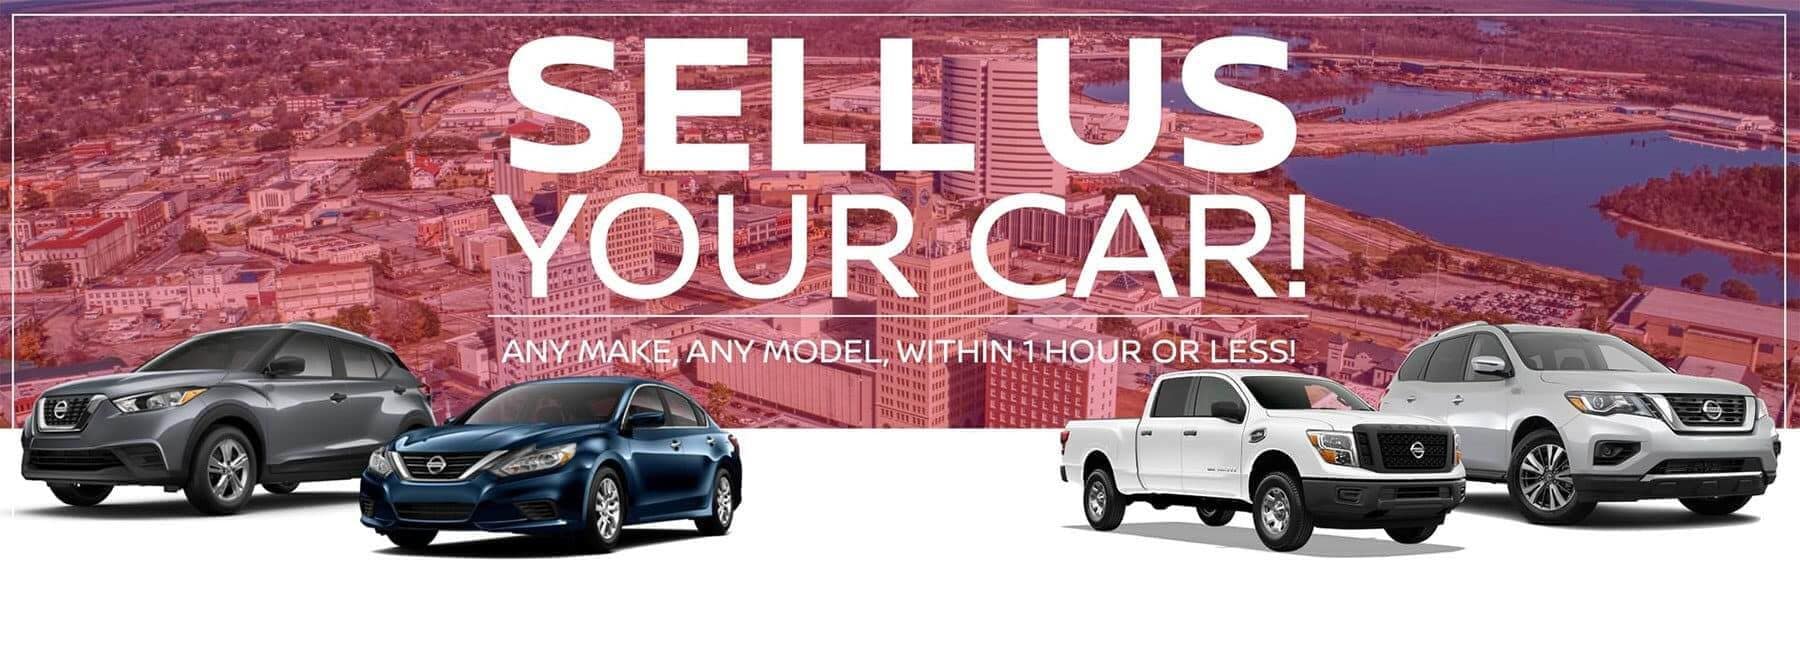 Want to sell your car? We buy cars. Whether you buy from us or not. CASH PAID ON THE SPOT. Stop in today for an instant CASH OFFER.